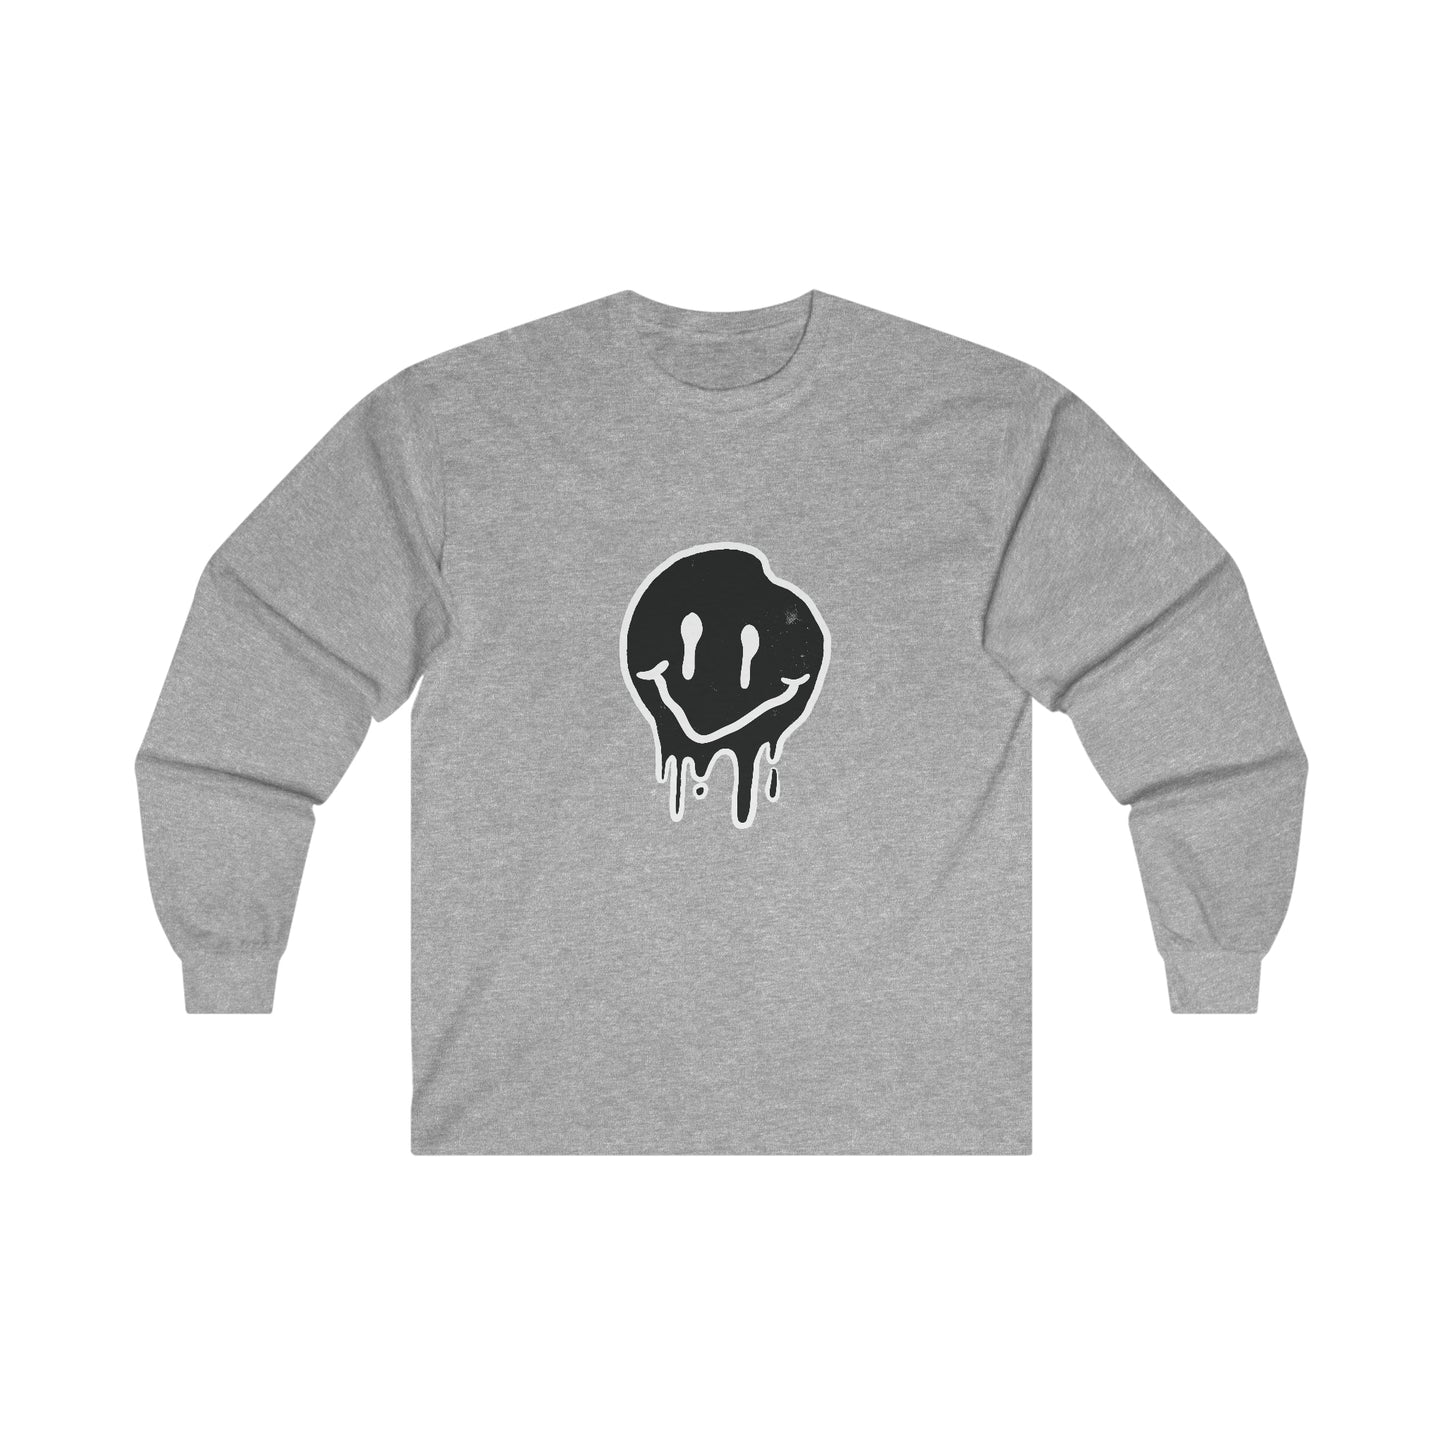 Melting Smiley Ultra Cotton Long Sleeve Tee